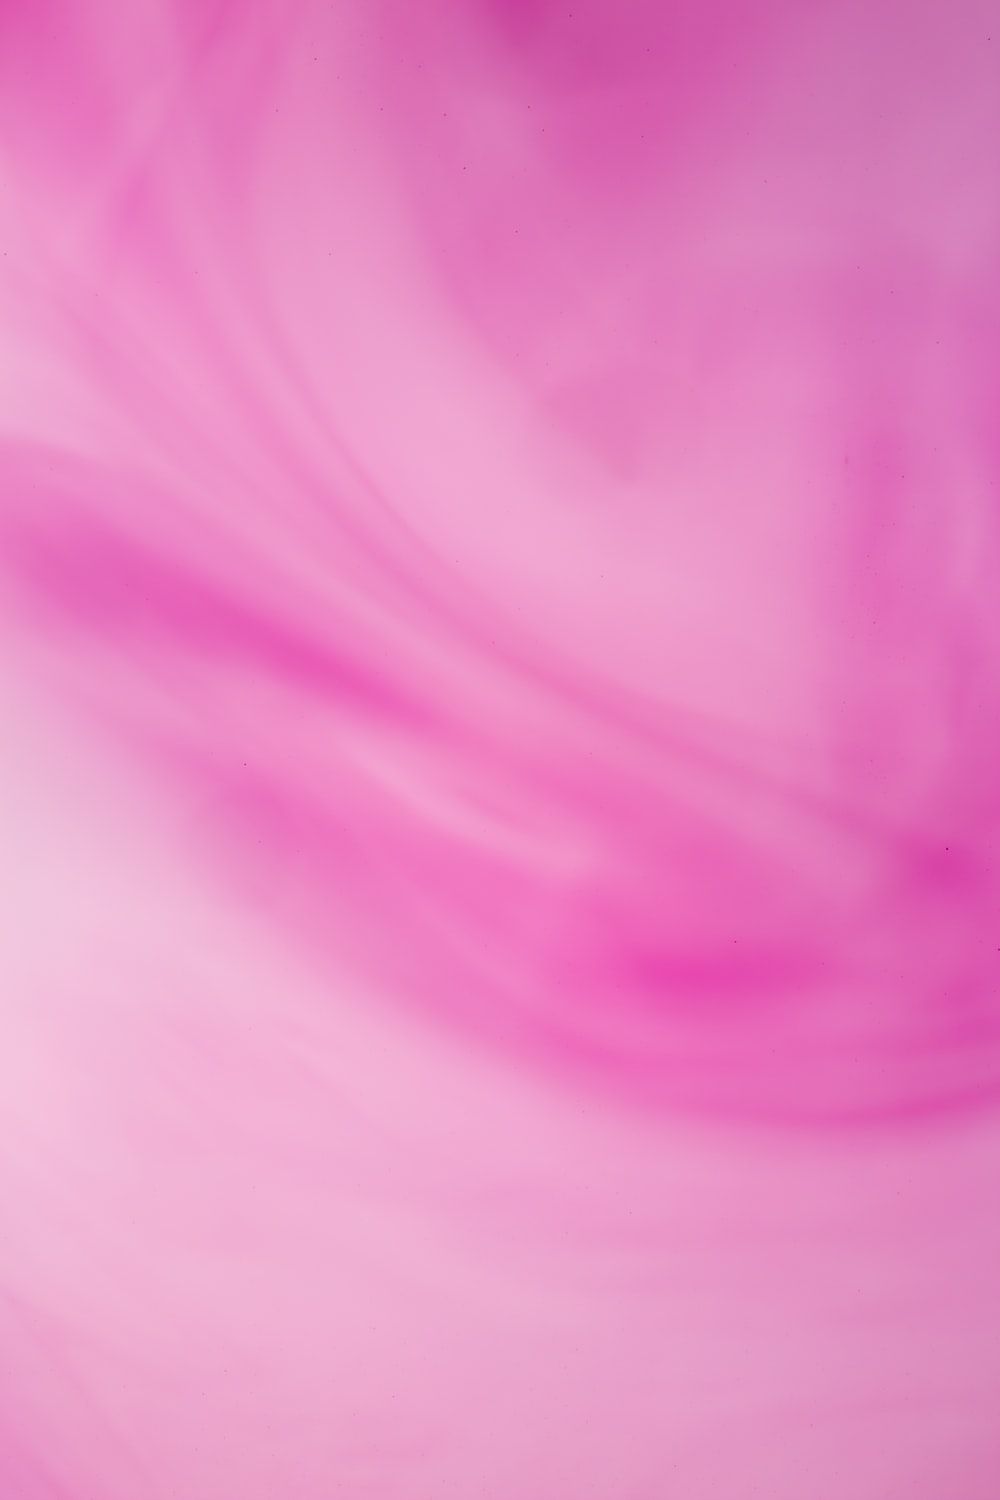 A pink background with some white lines - Magenta